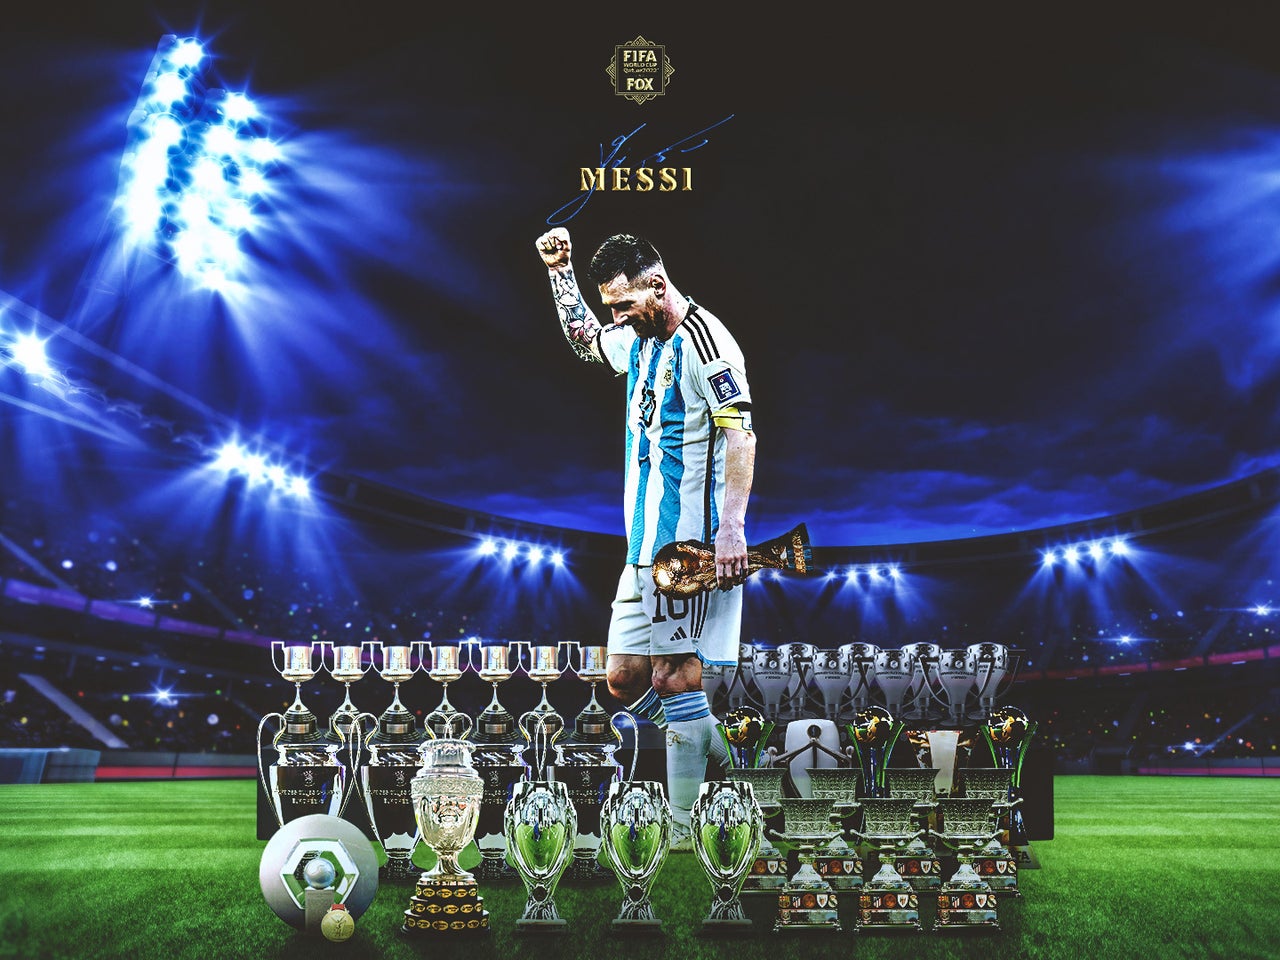 Lionel Messi's World Cup pursuit has become the world's shared dream